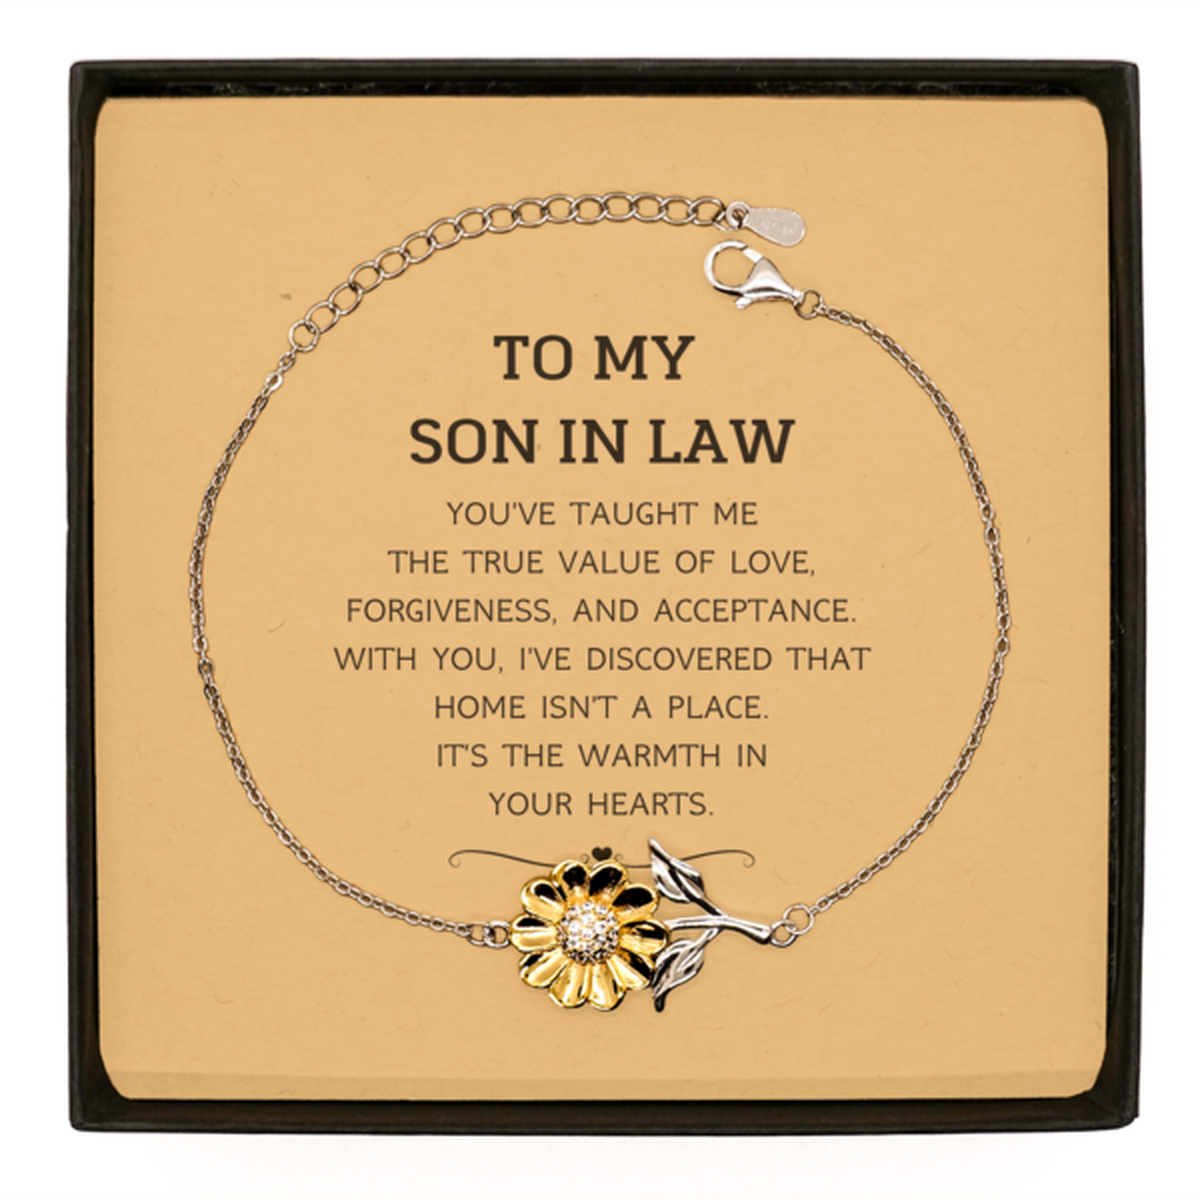 To My Son In Law Gifts, You've taught me the true value of love, Thank You Gifts For Son In Law, Birthday Sunflower Bracelet For Son In Law